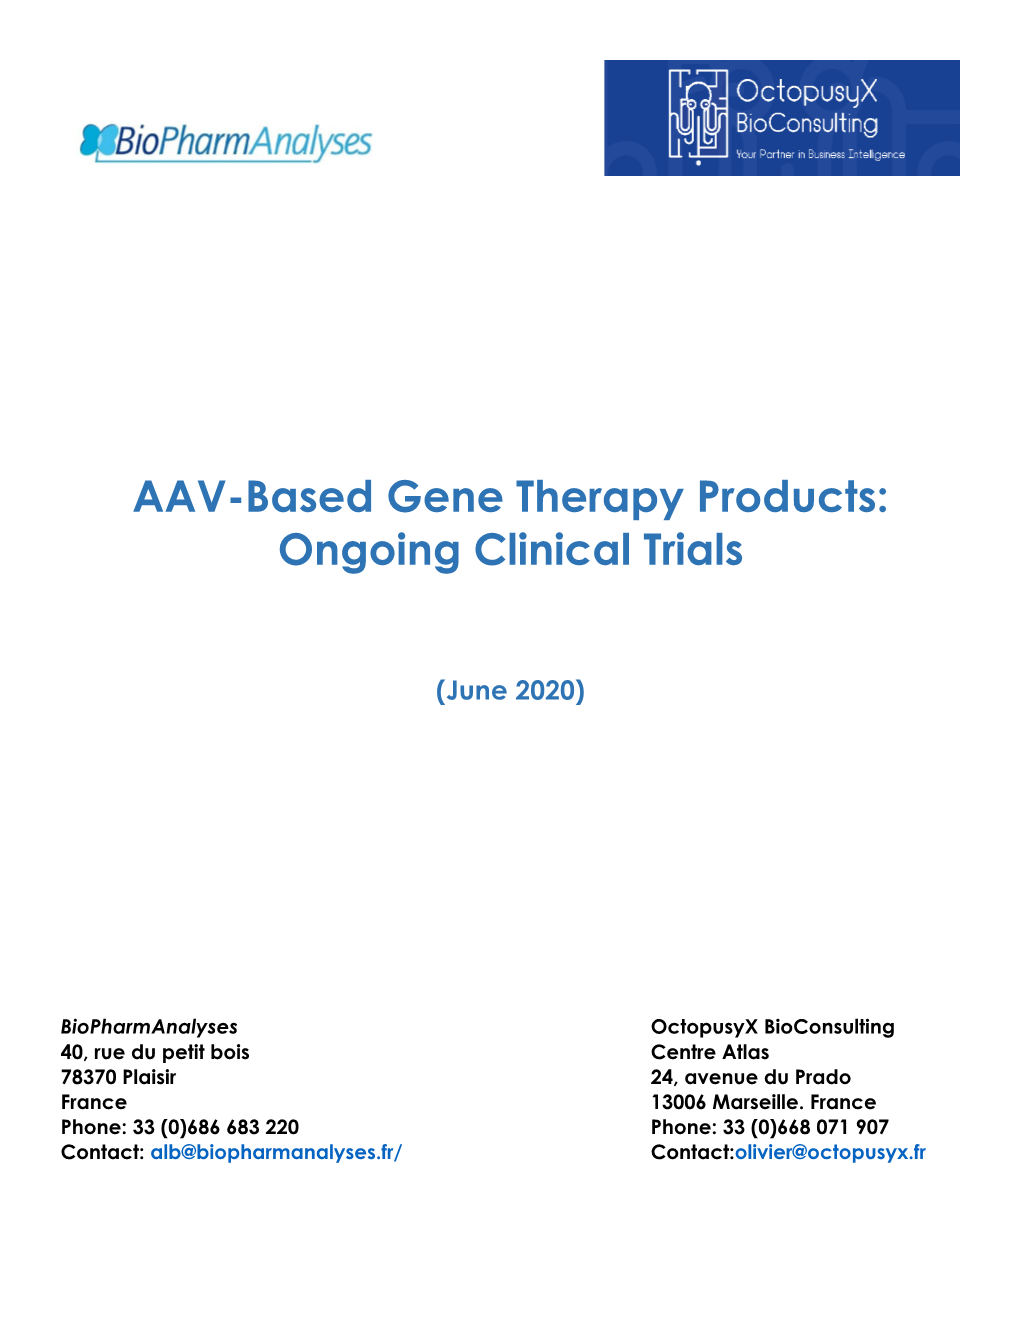 AAV-Based Gene Therapy Products: Ongoing Clinical Trials